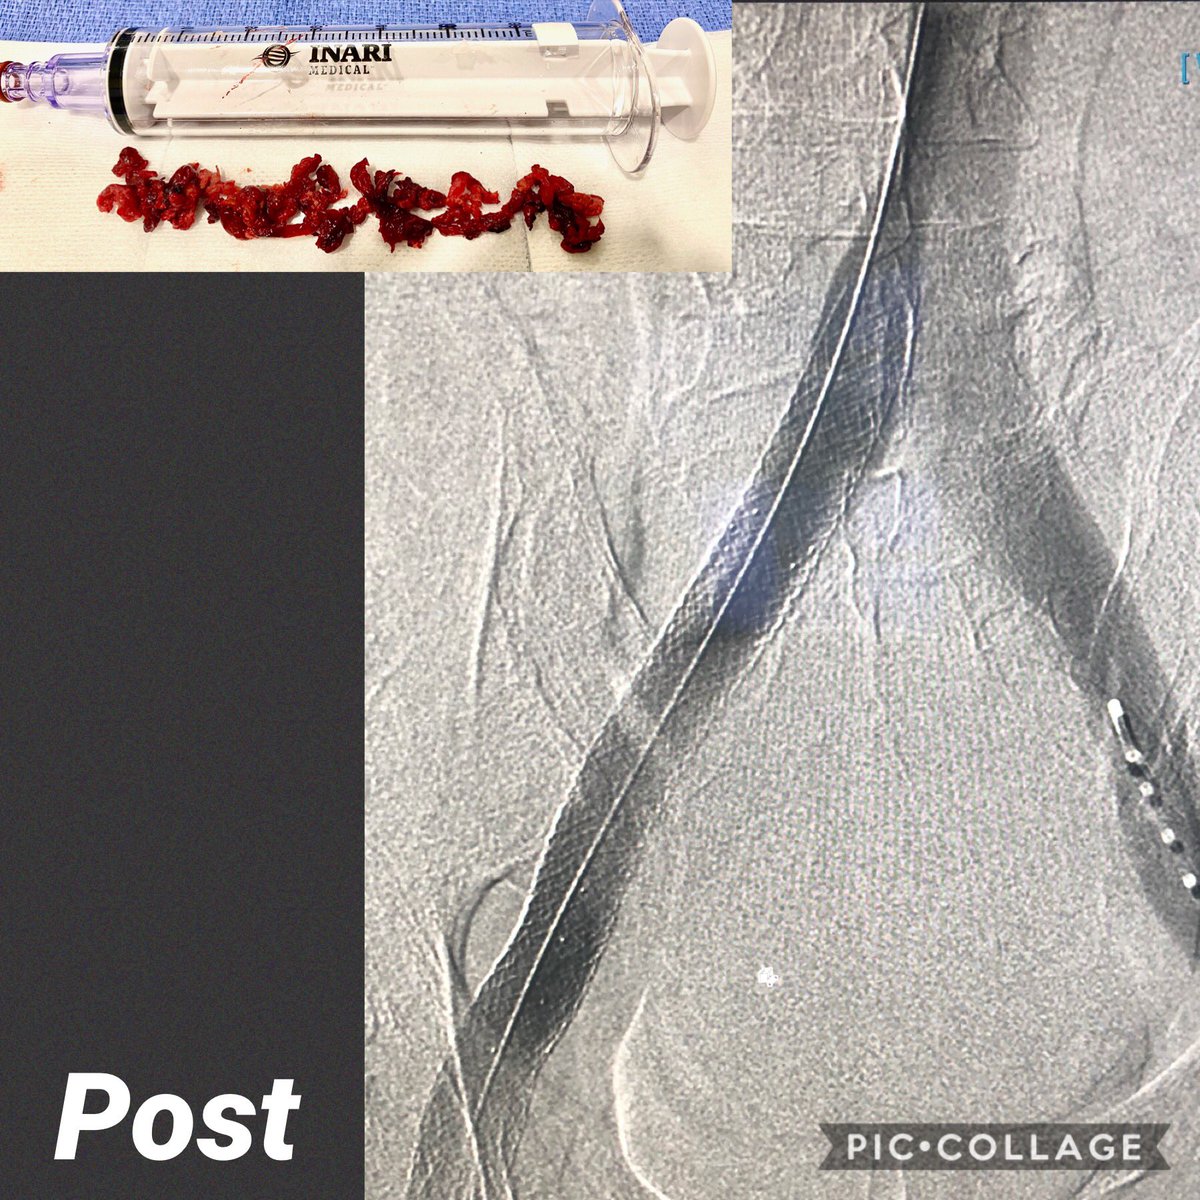 Back to back clot haul day. Case 1 acute, case 2 acute on chronic. @InariMedical Clottriever for the win. No ICU, no overnight lysis.